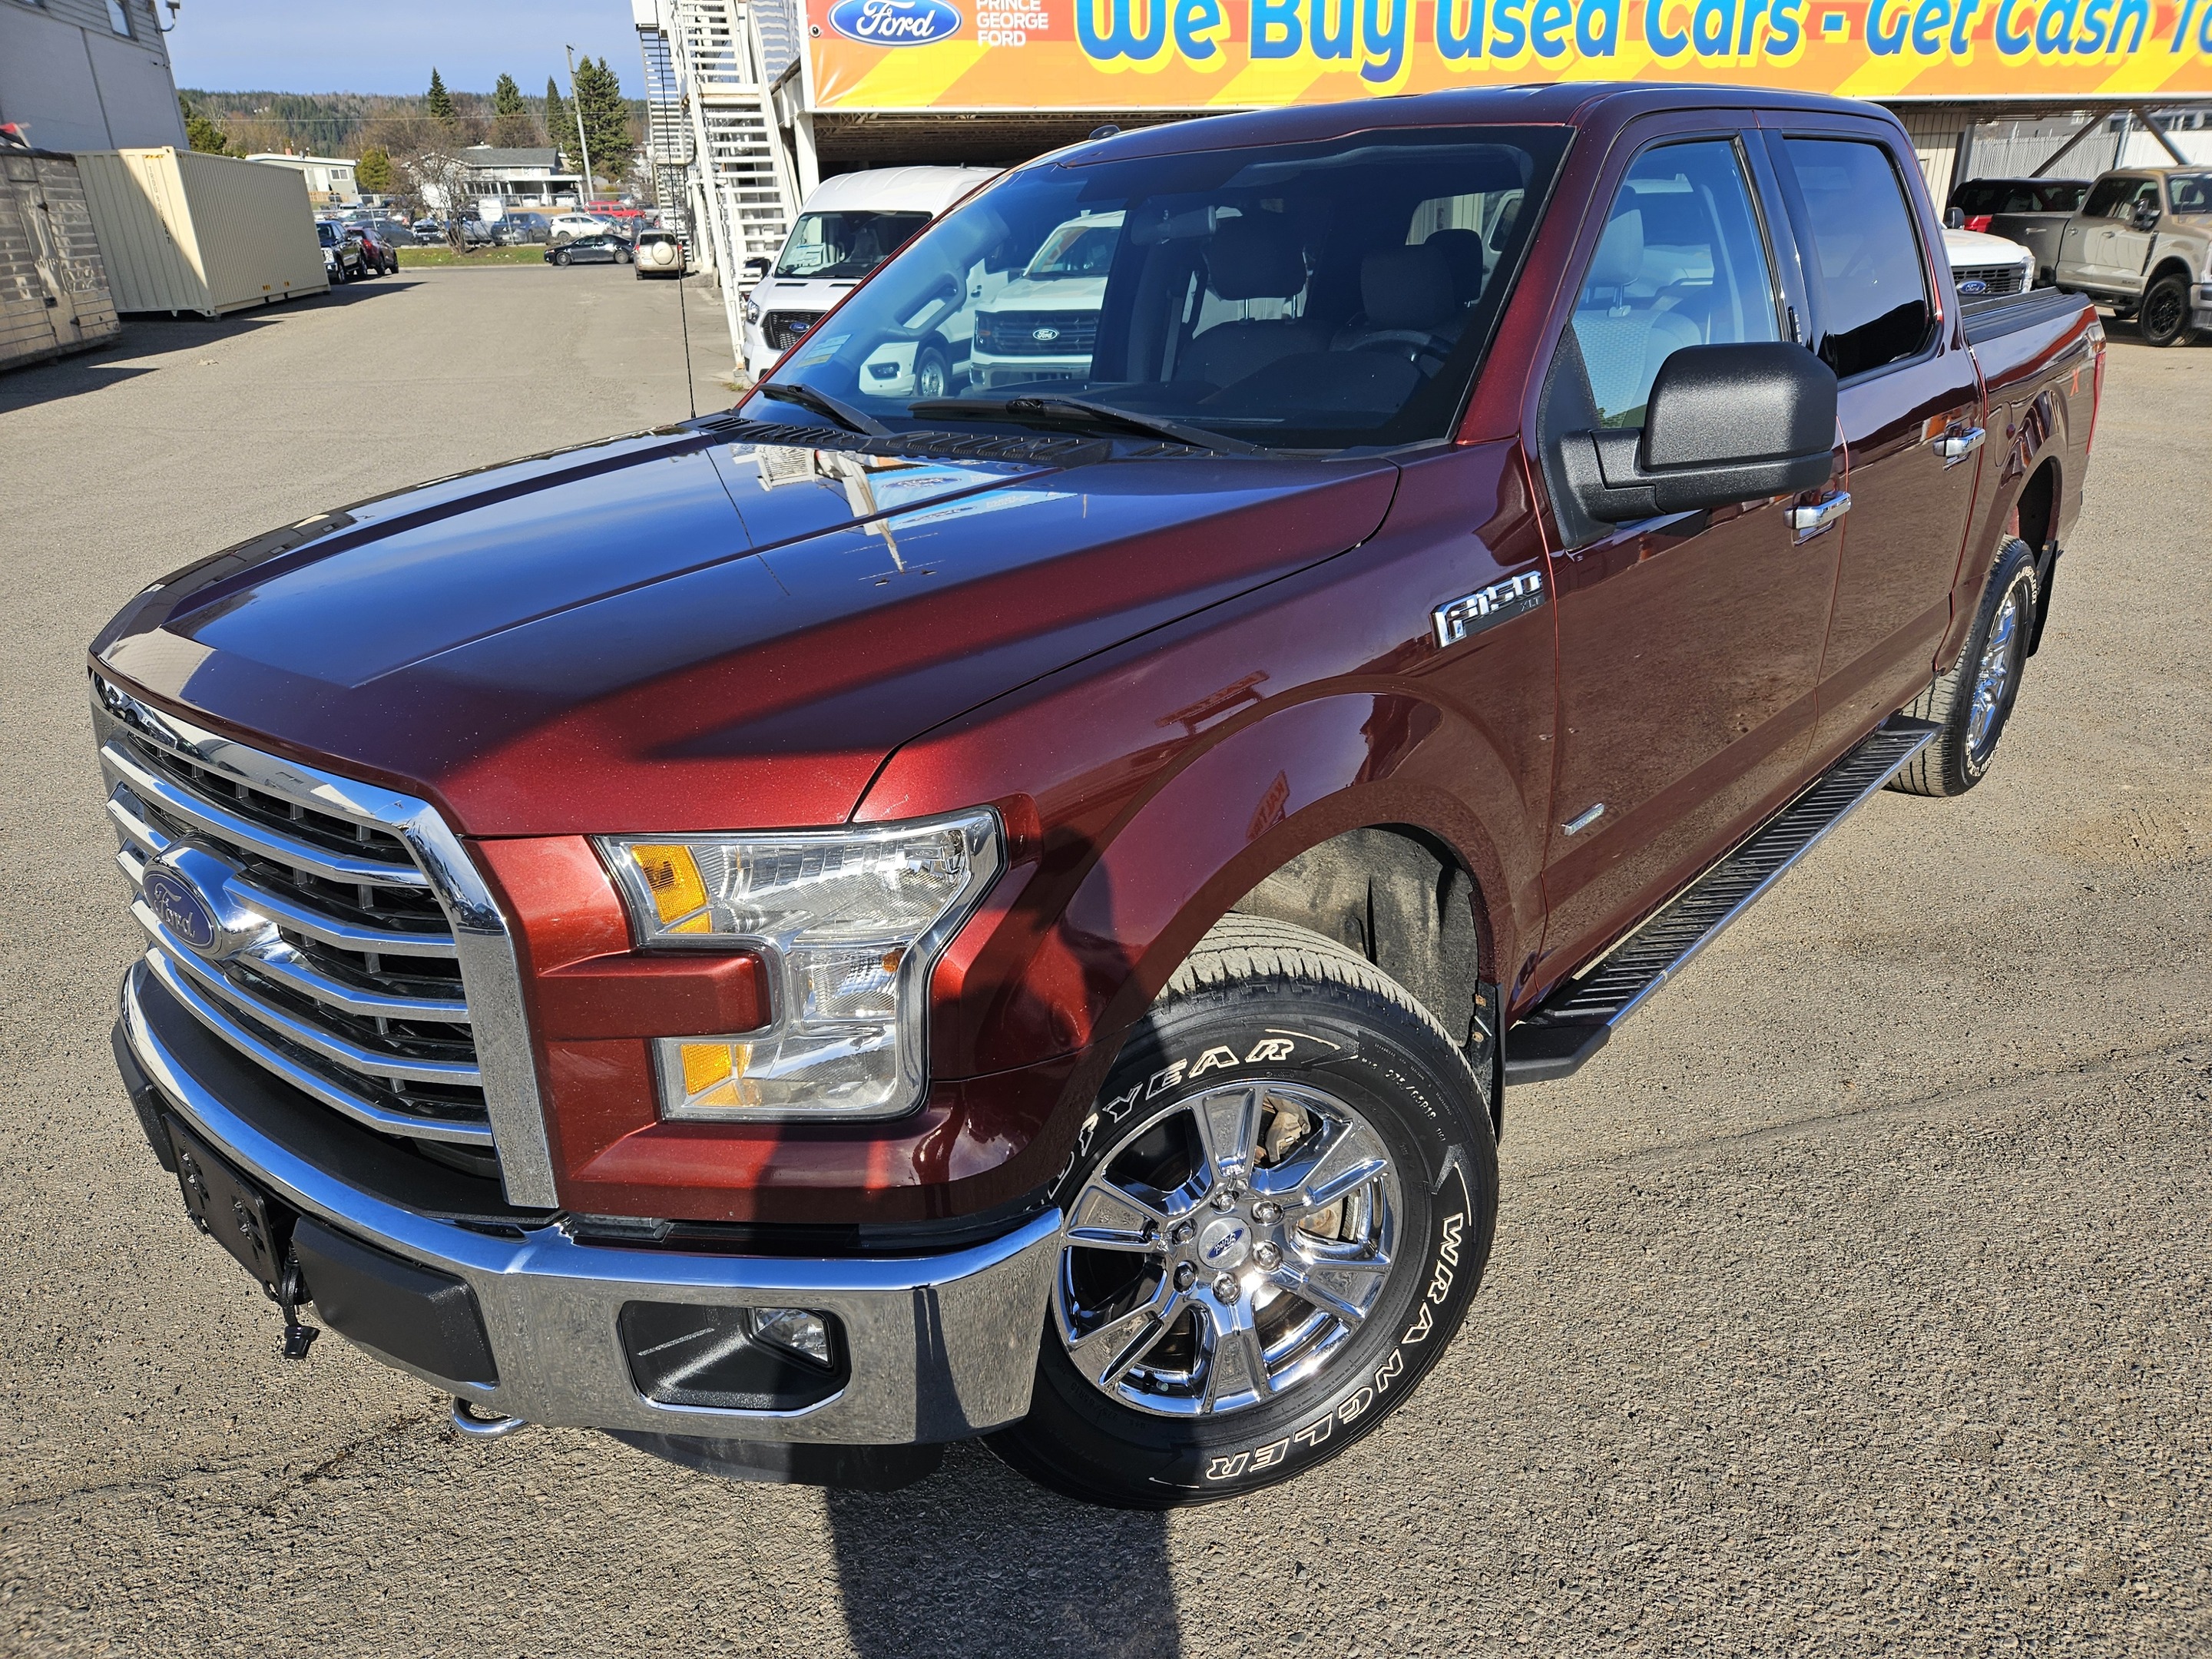 2015 Ford F-150 XLT | 300A | Trailer/XTR Package | Keyless Entry 